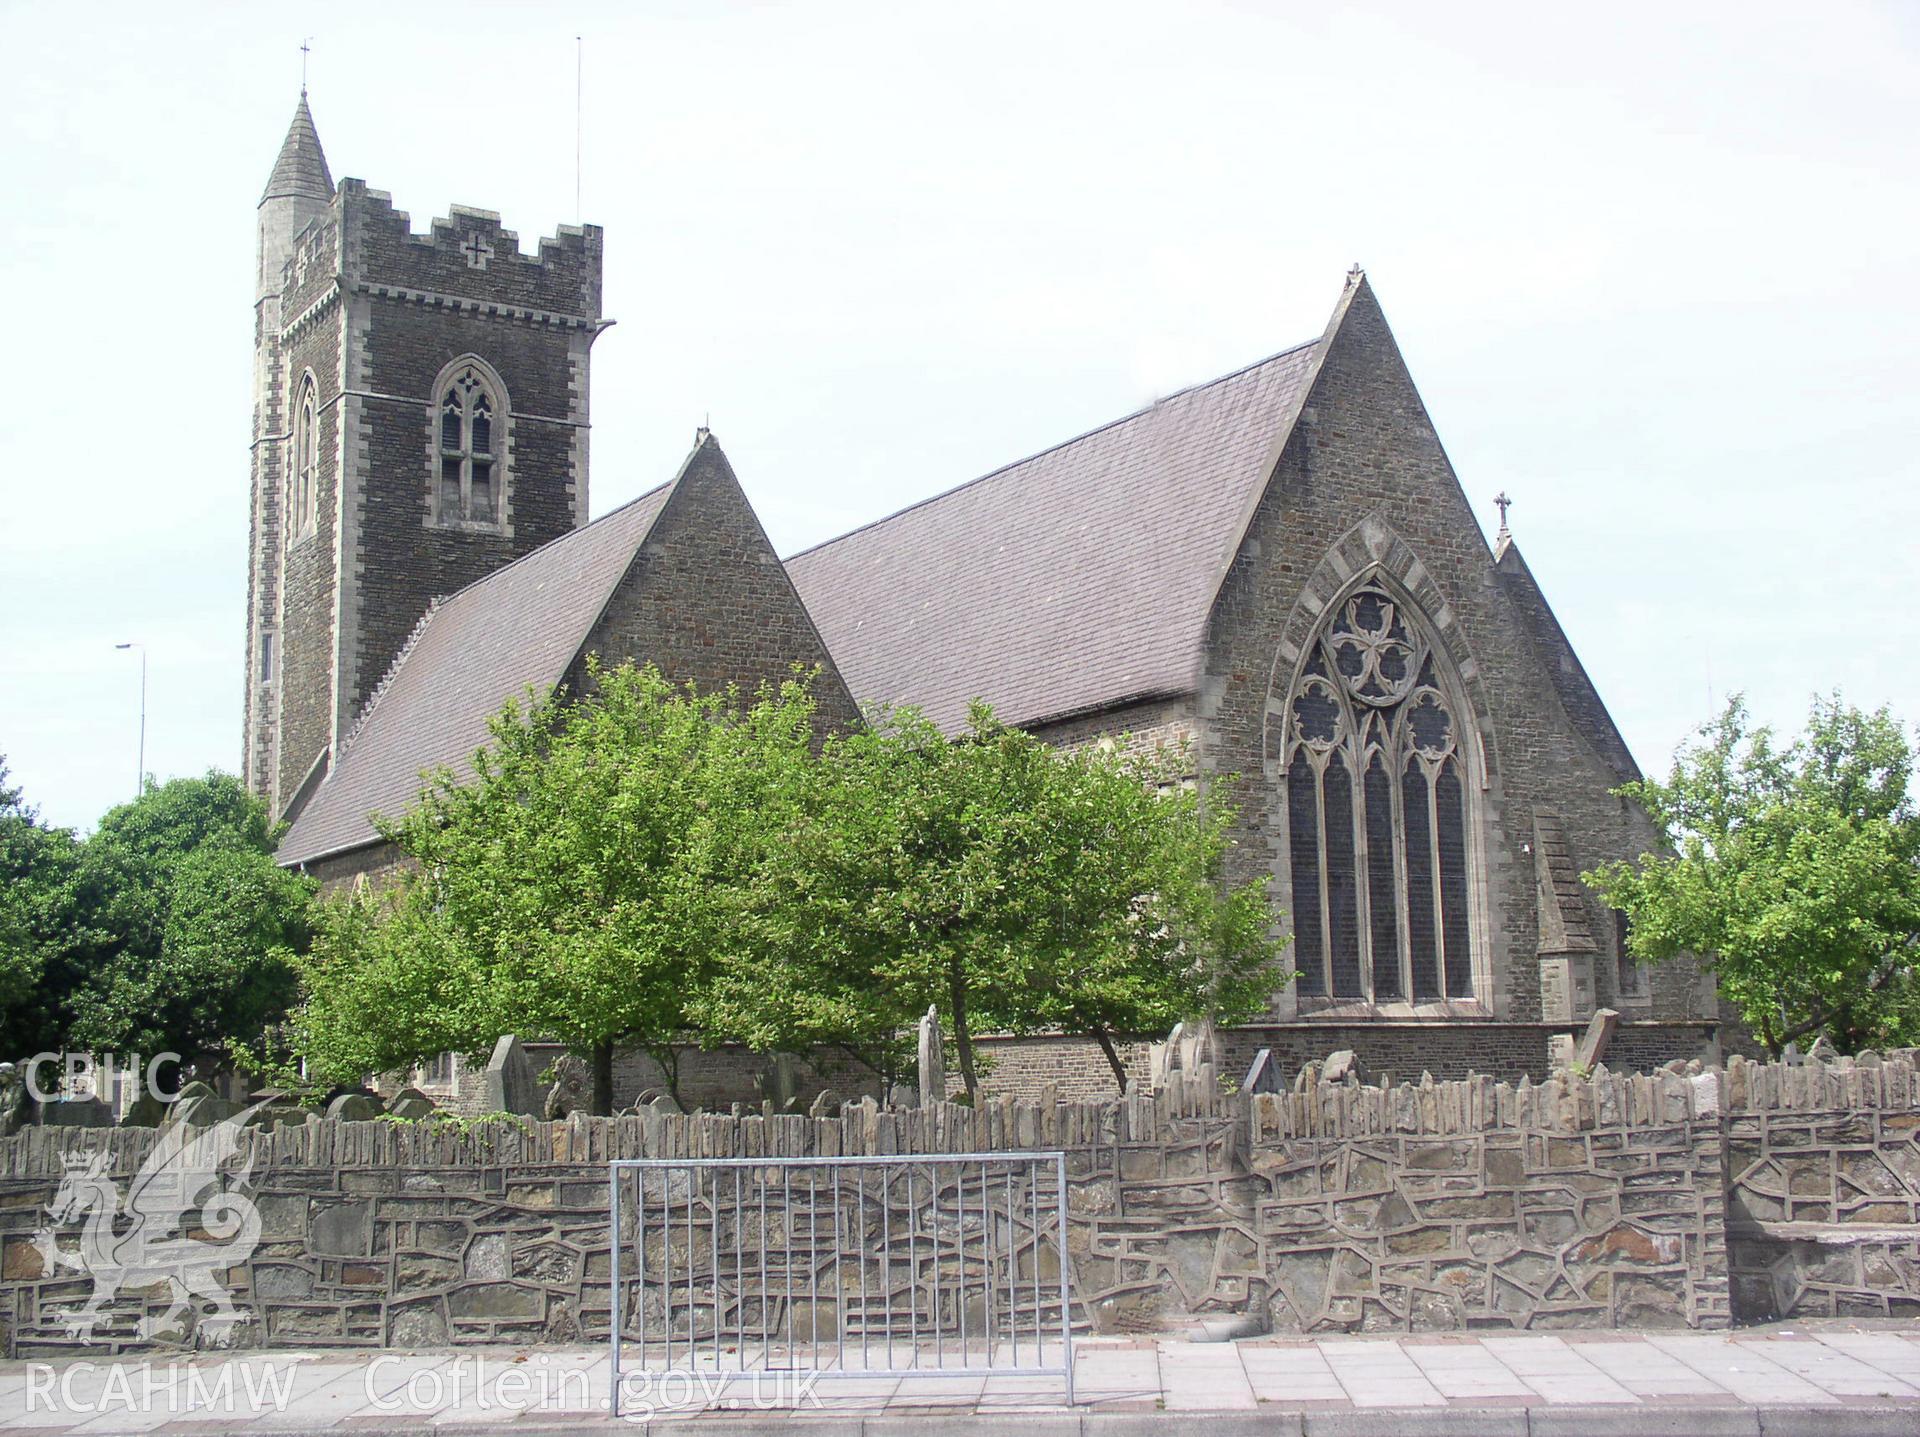 Colour digital photograph showing the exterior of St Mary's Church, Aberafan; Glamorgan.